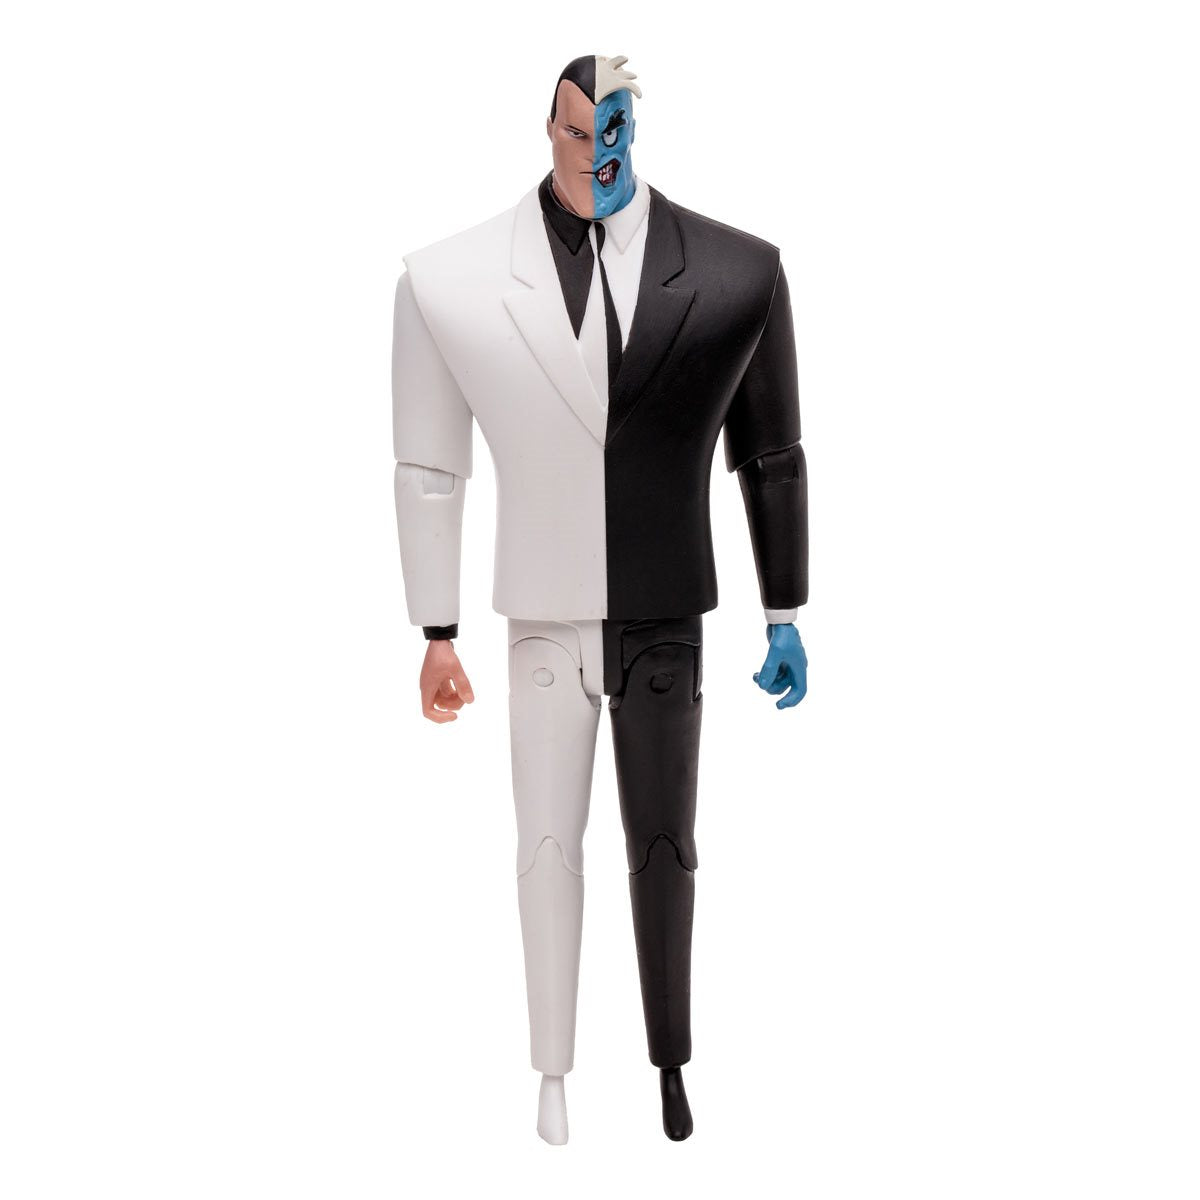 The New Batman Adventures Wave 1 Two-Face